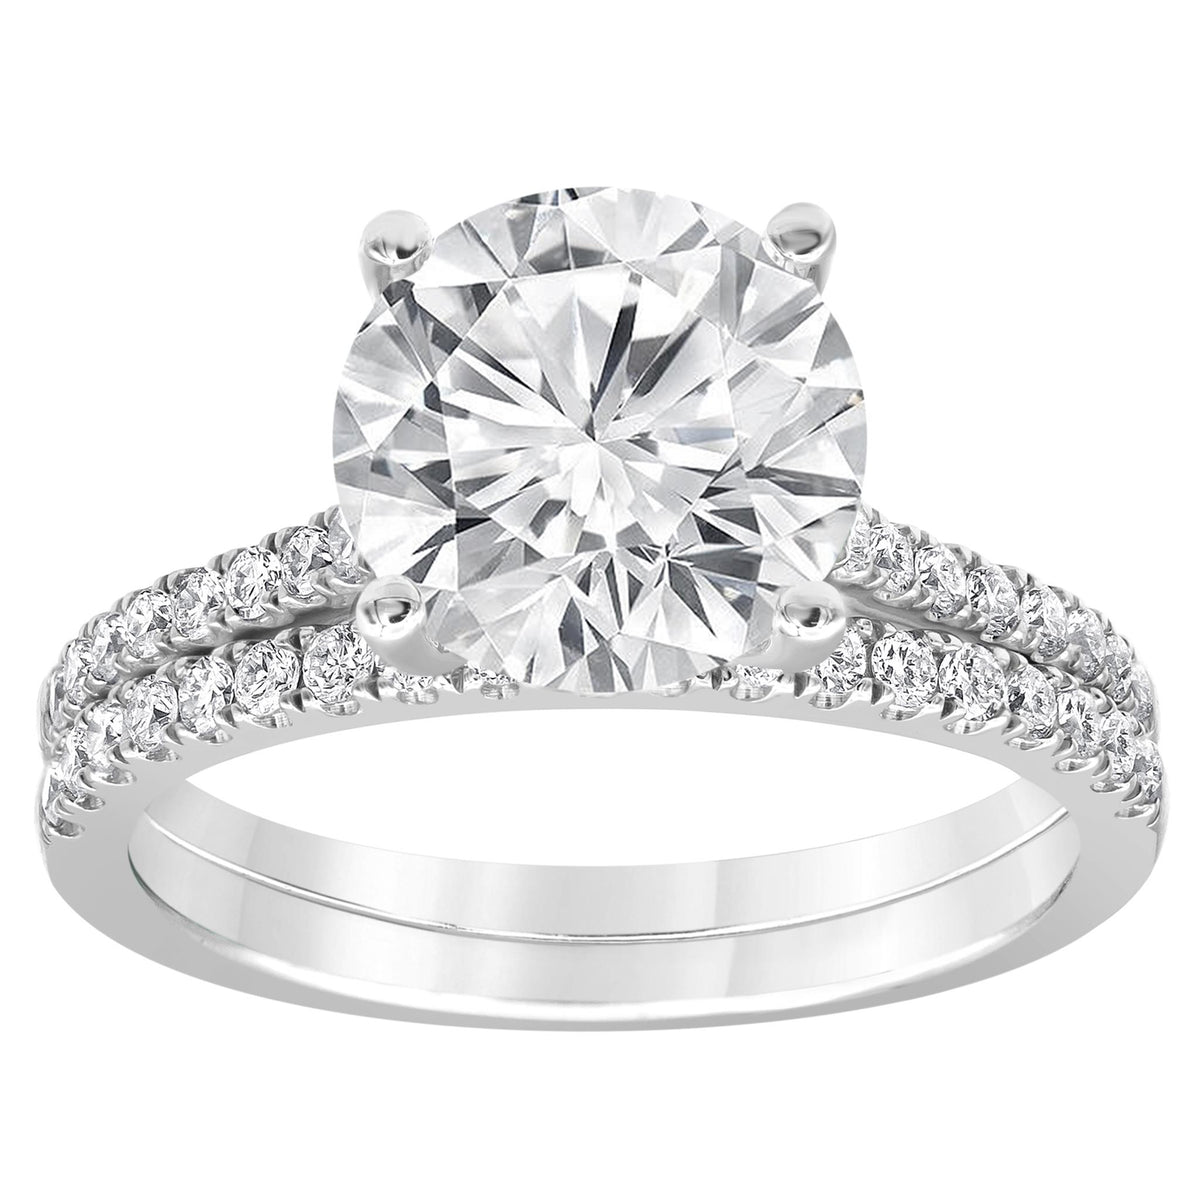 14Kt White Gold Classic Prong Engagement And Wedding Ring Set With 2.00ct Lab-Grown Center Diamond